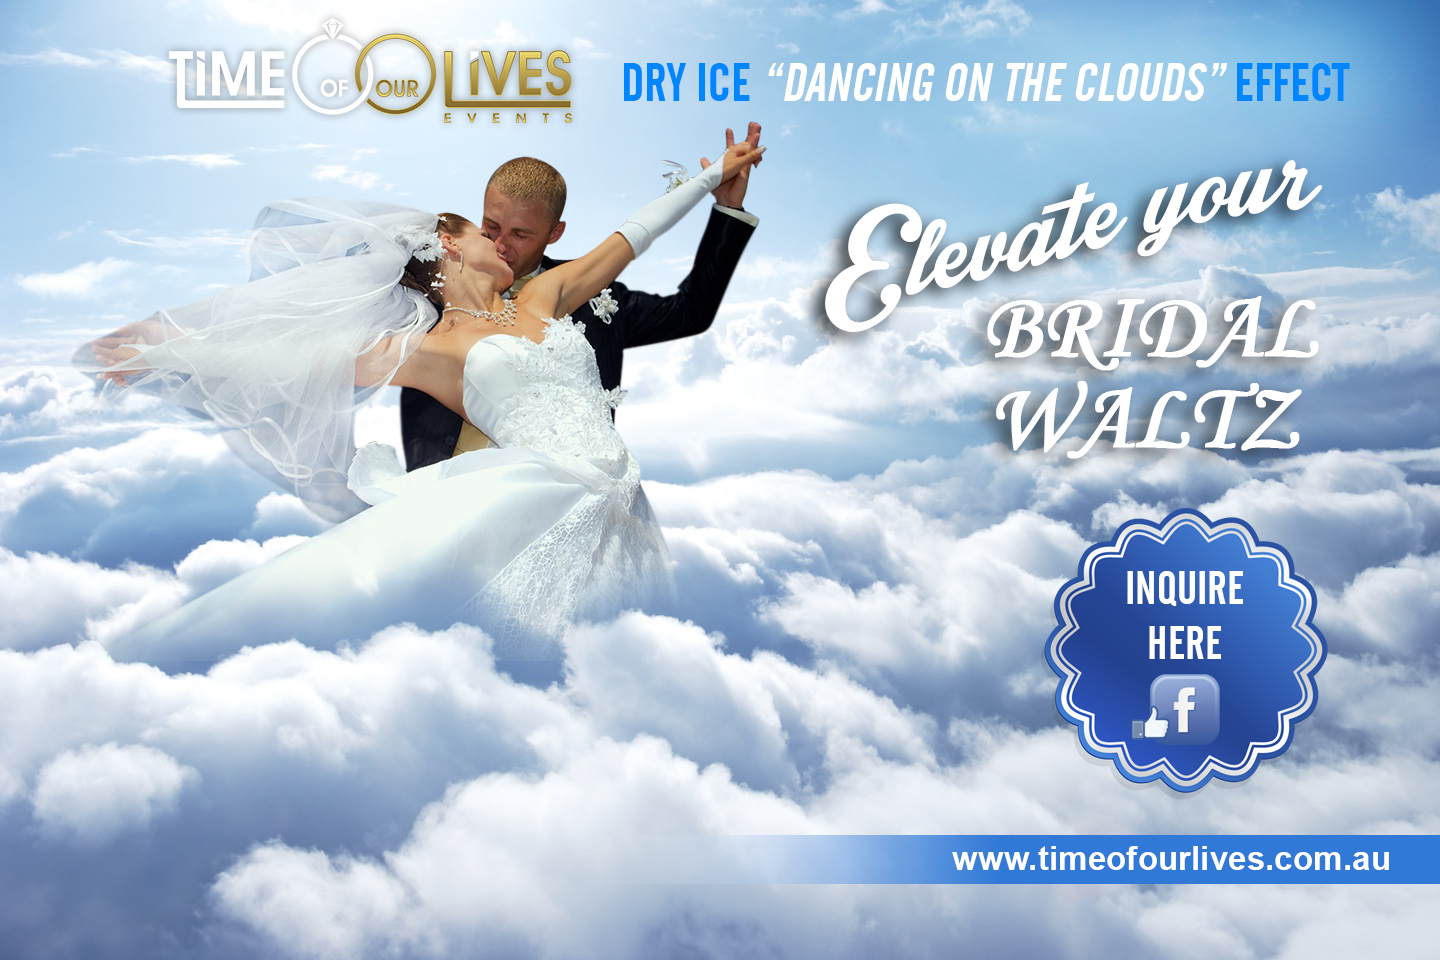 Time of Our Lives Events. Dry Ice Machine hire Sydney. Wedding decor effect